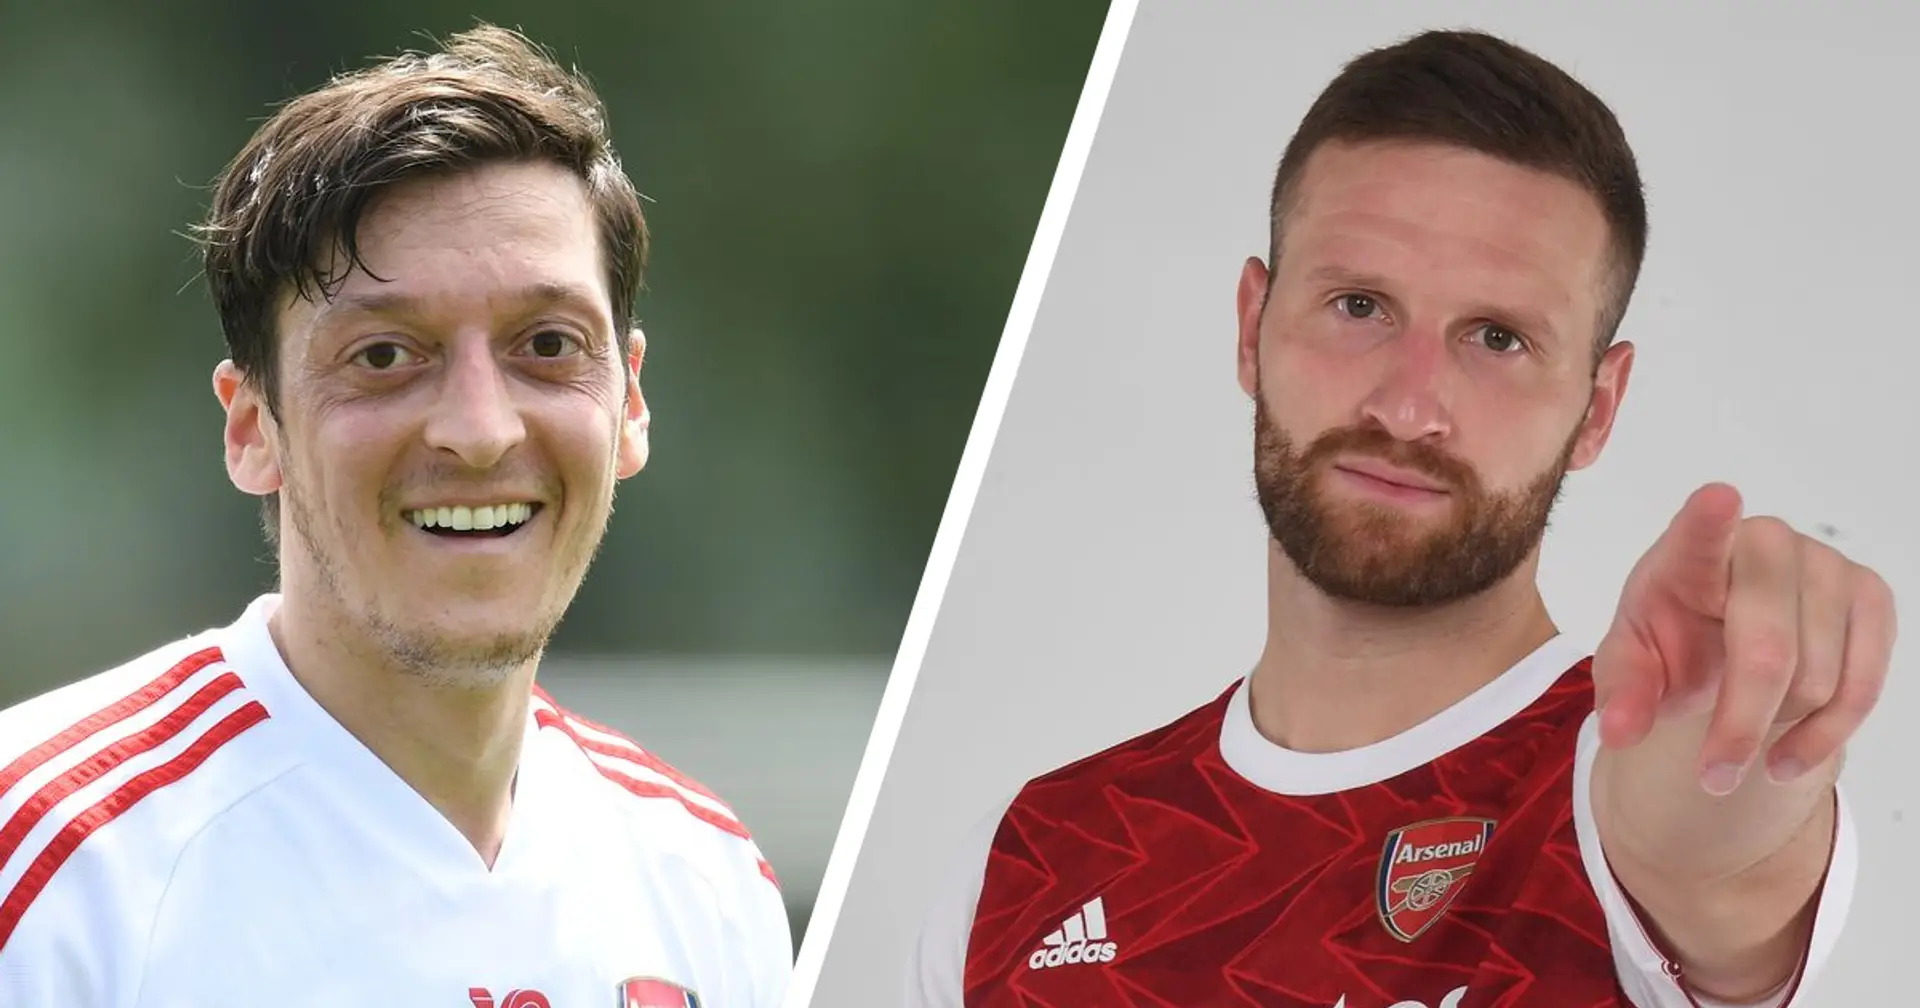 Mustafi, Ozil & 5 other Gunners whose contracts expire in 2021: predicting their Arsenal futures